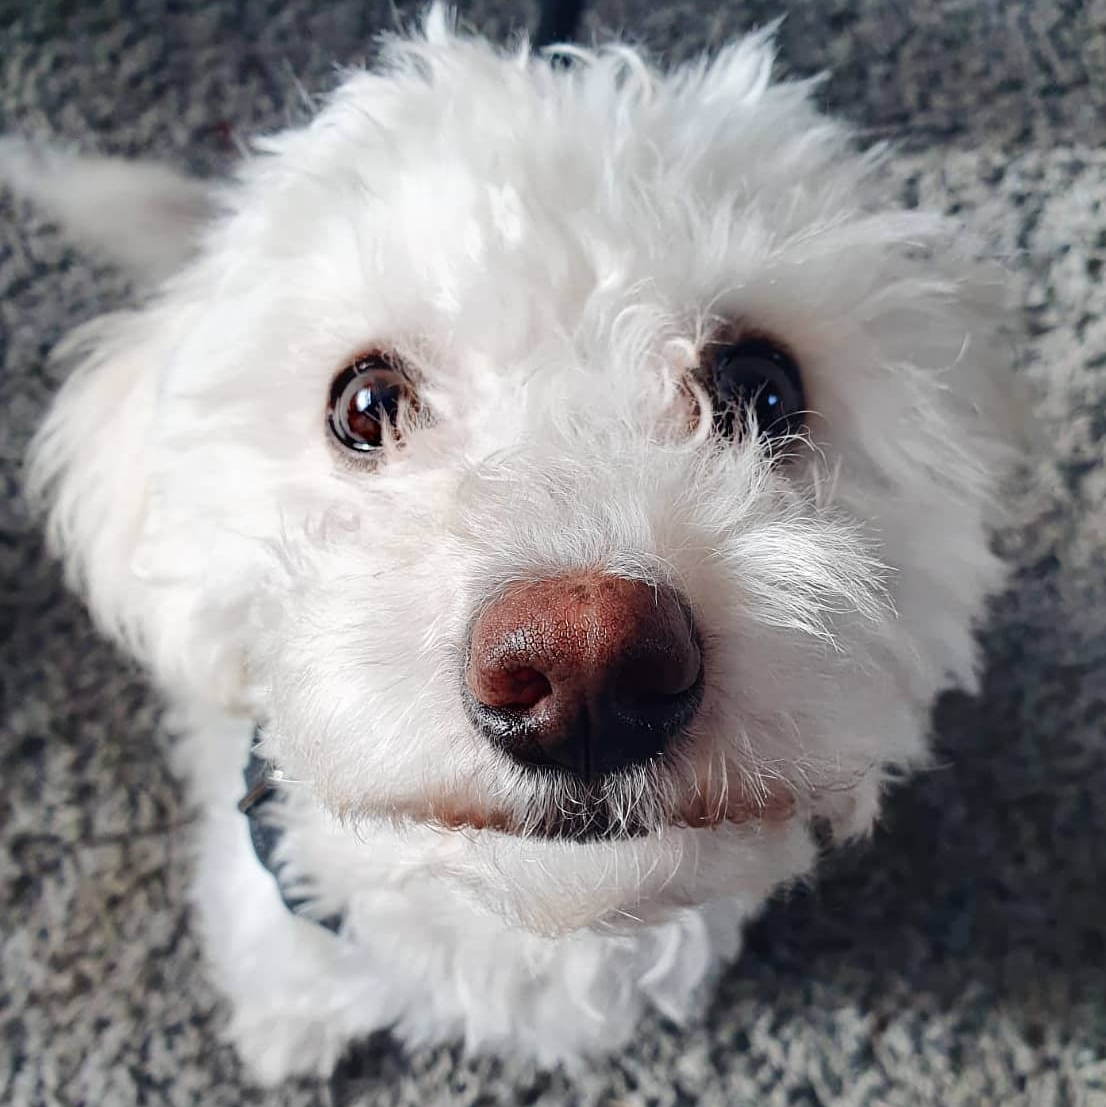 🐶 My humans gave me the job title of Cheerer Upper! Double tap if you think I am doing a good job ❤️

📷 @otis_floof / ig

#petclubsa #barked #dog #doggo #puppy #pupper #poodlemix #puppiesofinstagram #puppylove #havapoo #poovanese #havapoosofinstagram 

petclubsa.com/feature-reques…